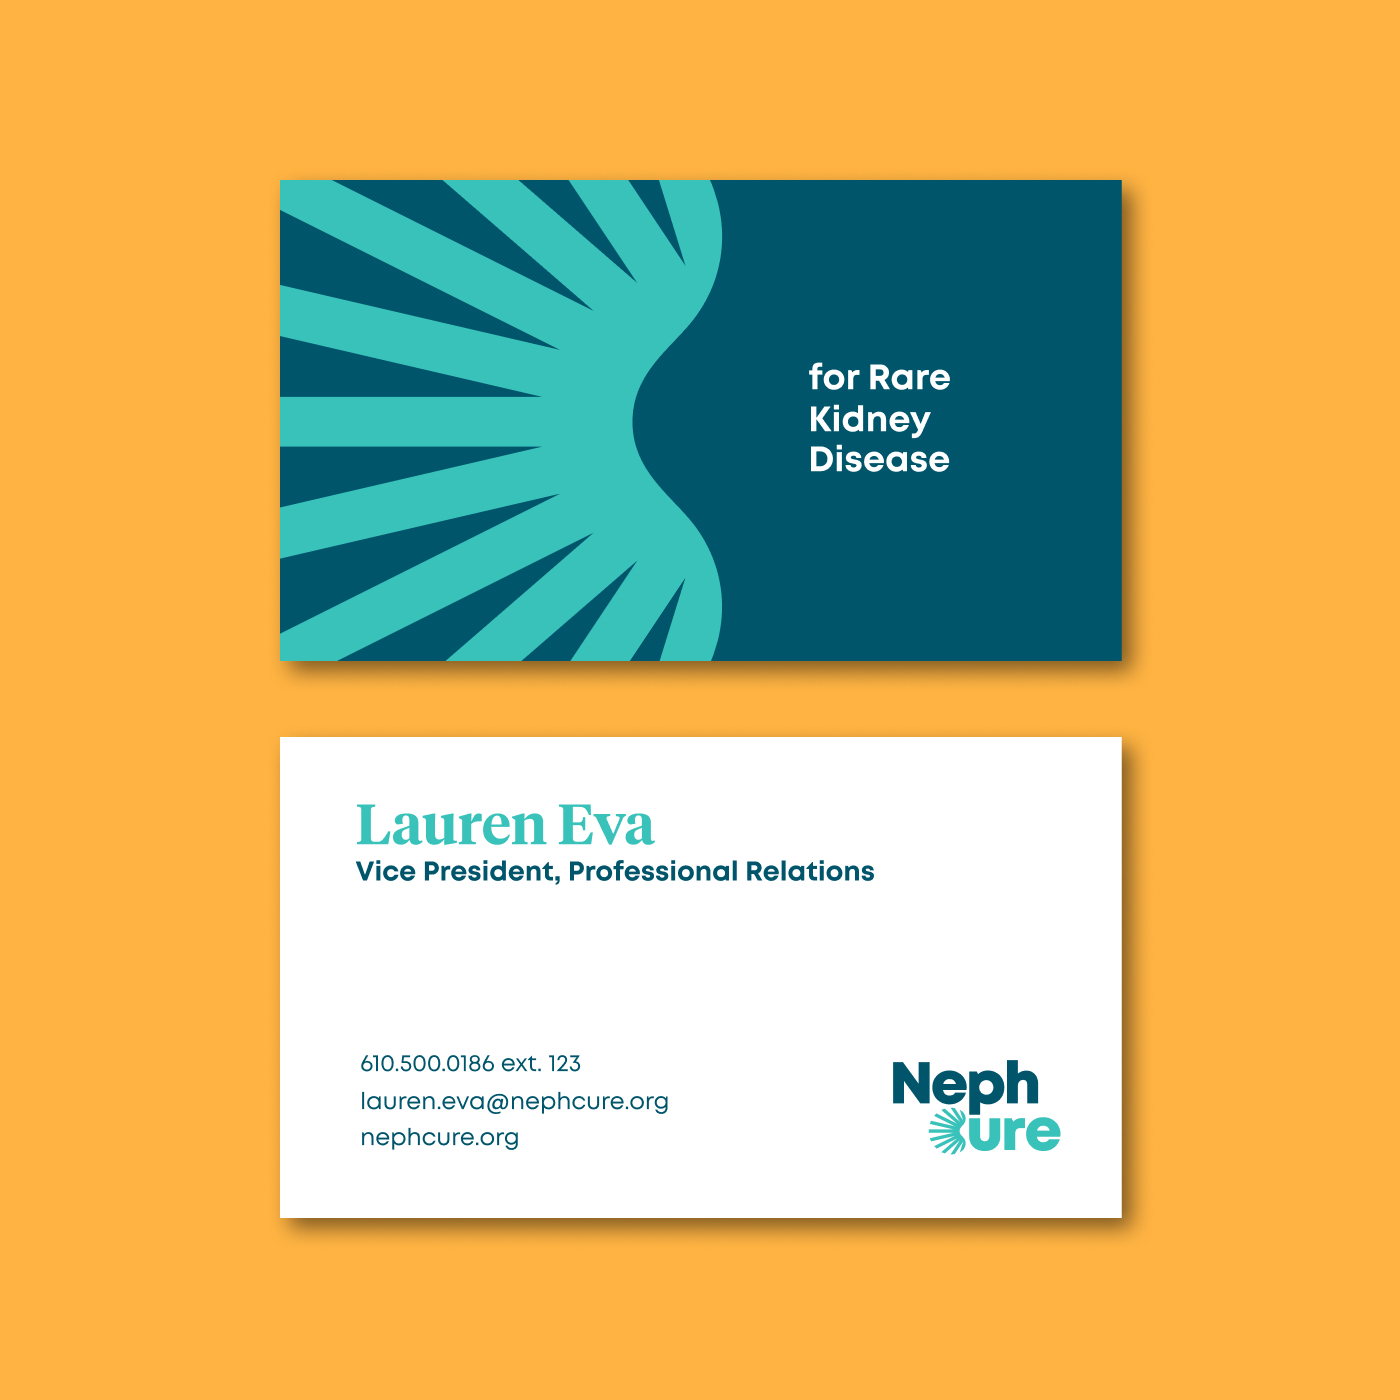 NephCure Push10 business card design